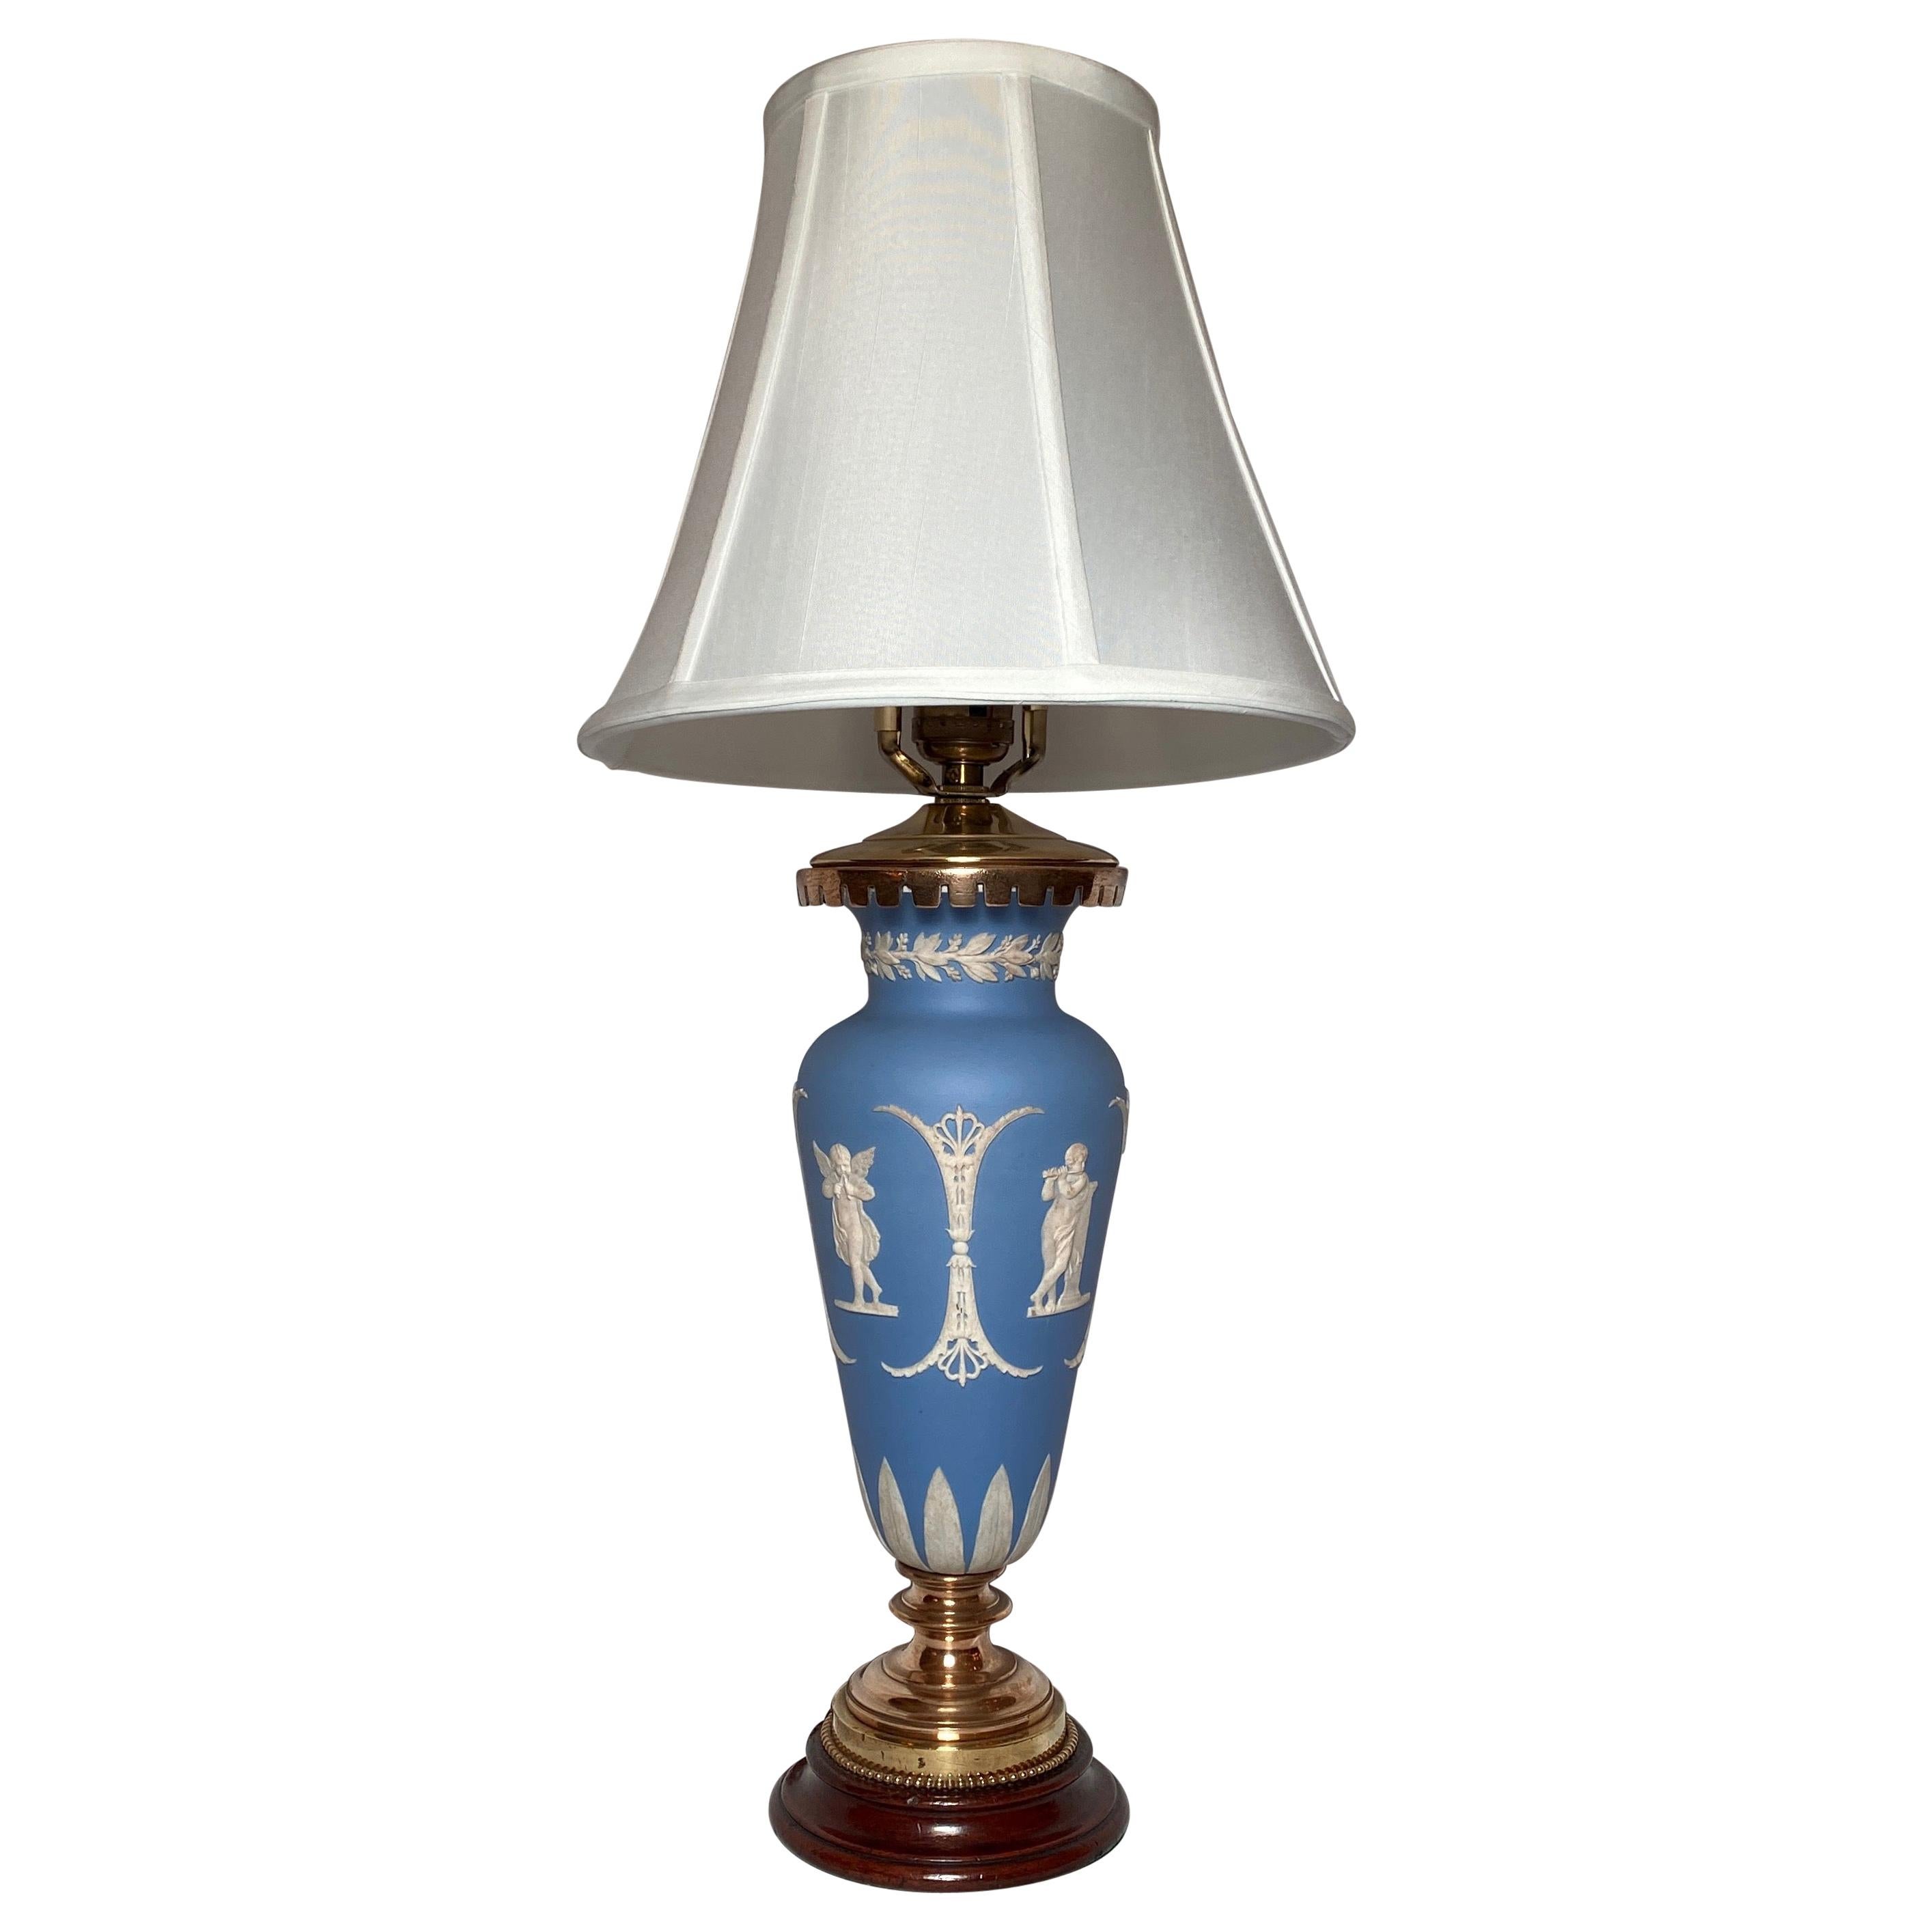 Antique English Wedgwood Porcelain Lamp, Circa 1890 For Sale at 1stDibs |  wedgewood lamps, wedgwood lamps value, vintage wedgwood lamps